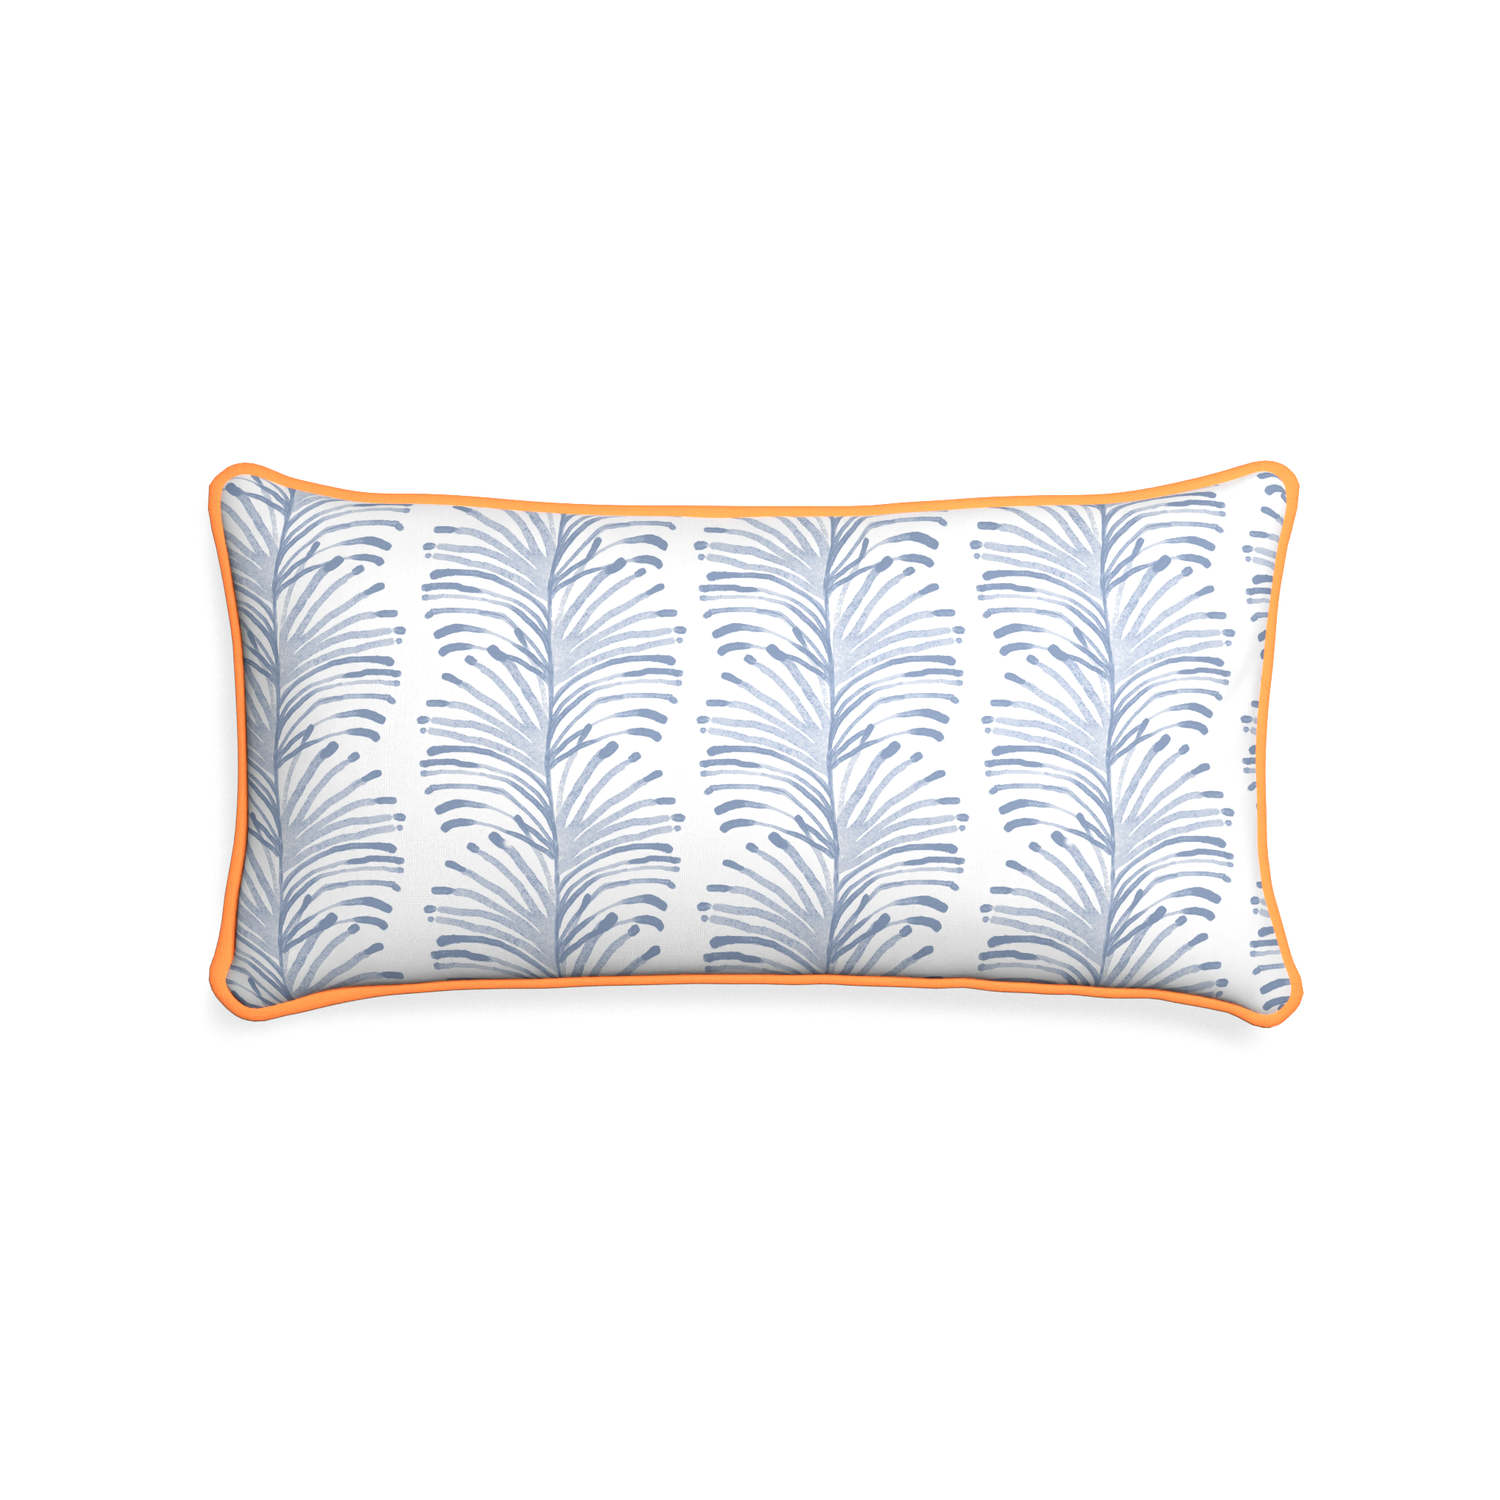 Midi-lumbar emma sky custom sky blue botanical stripepillow with clementine piping on white background